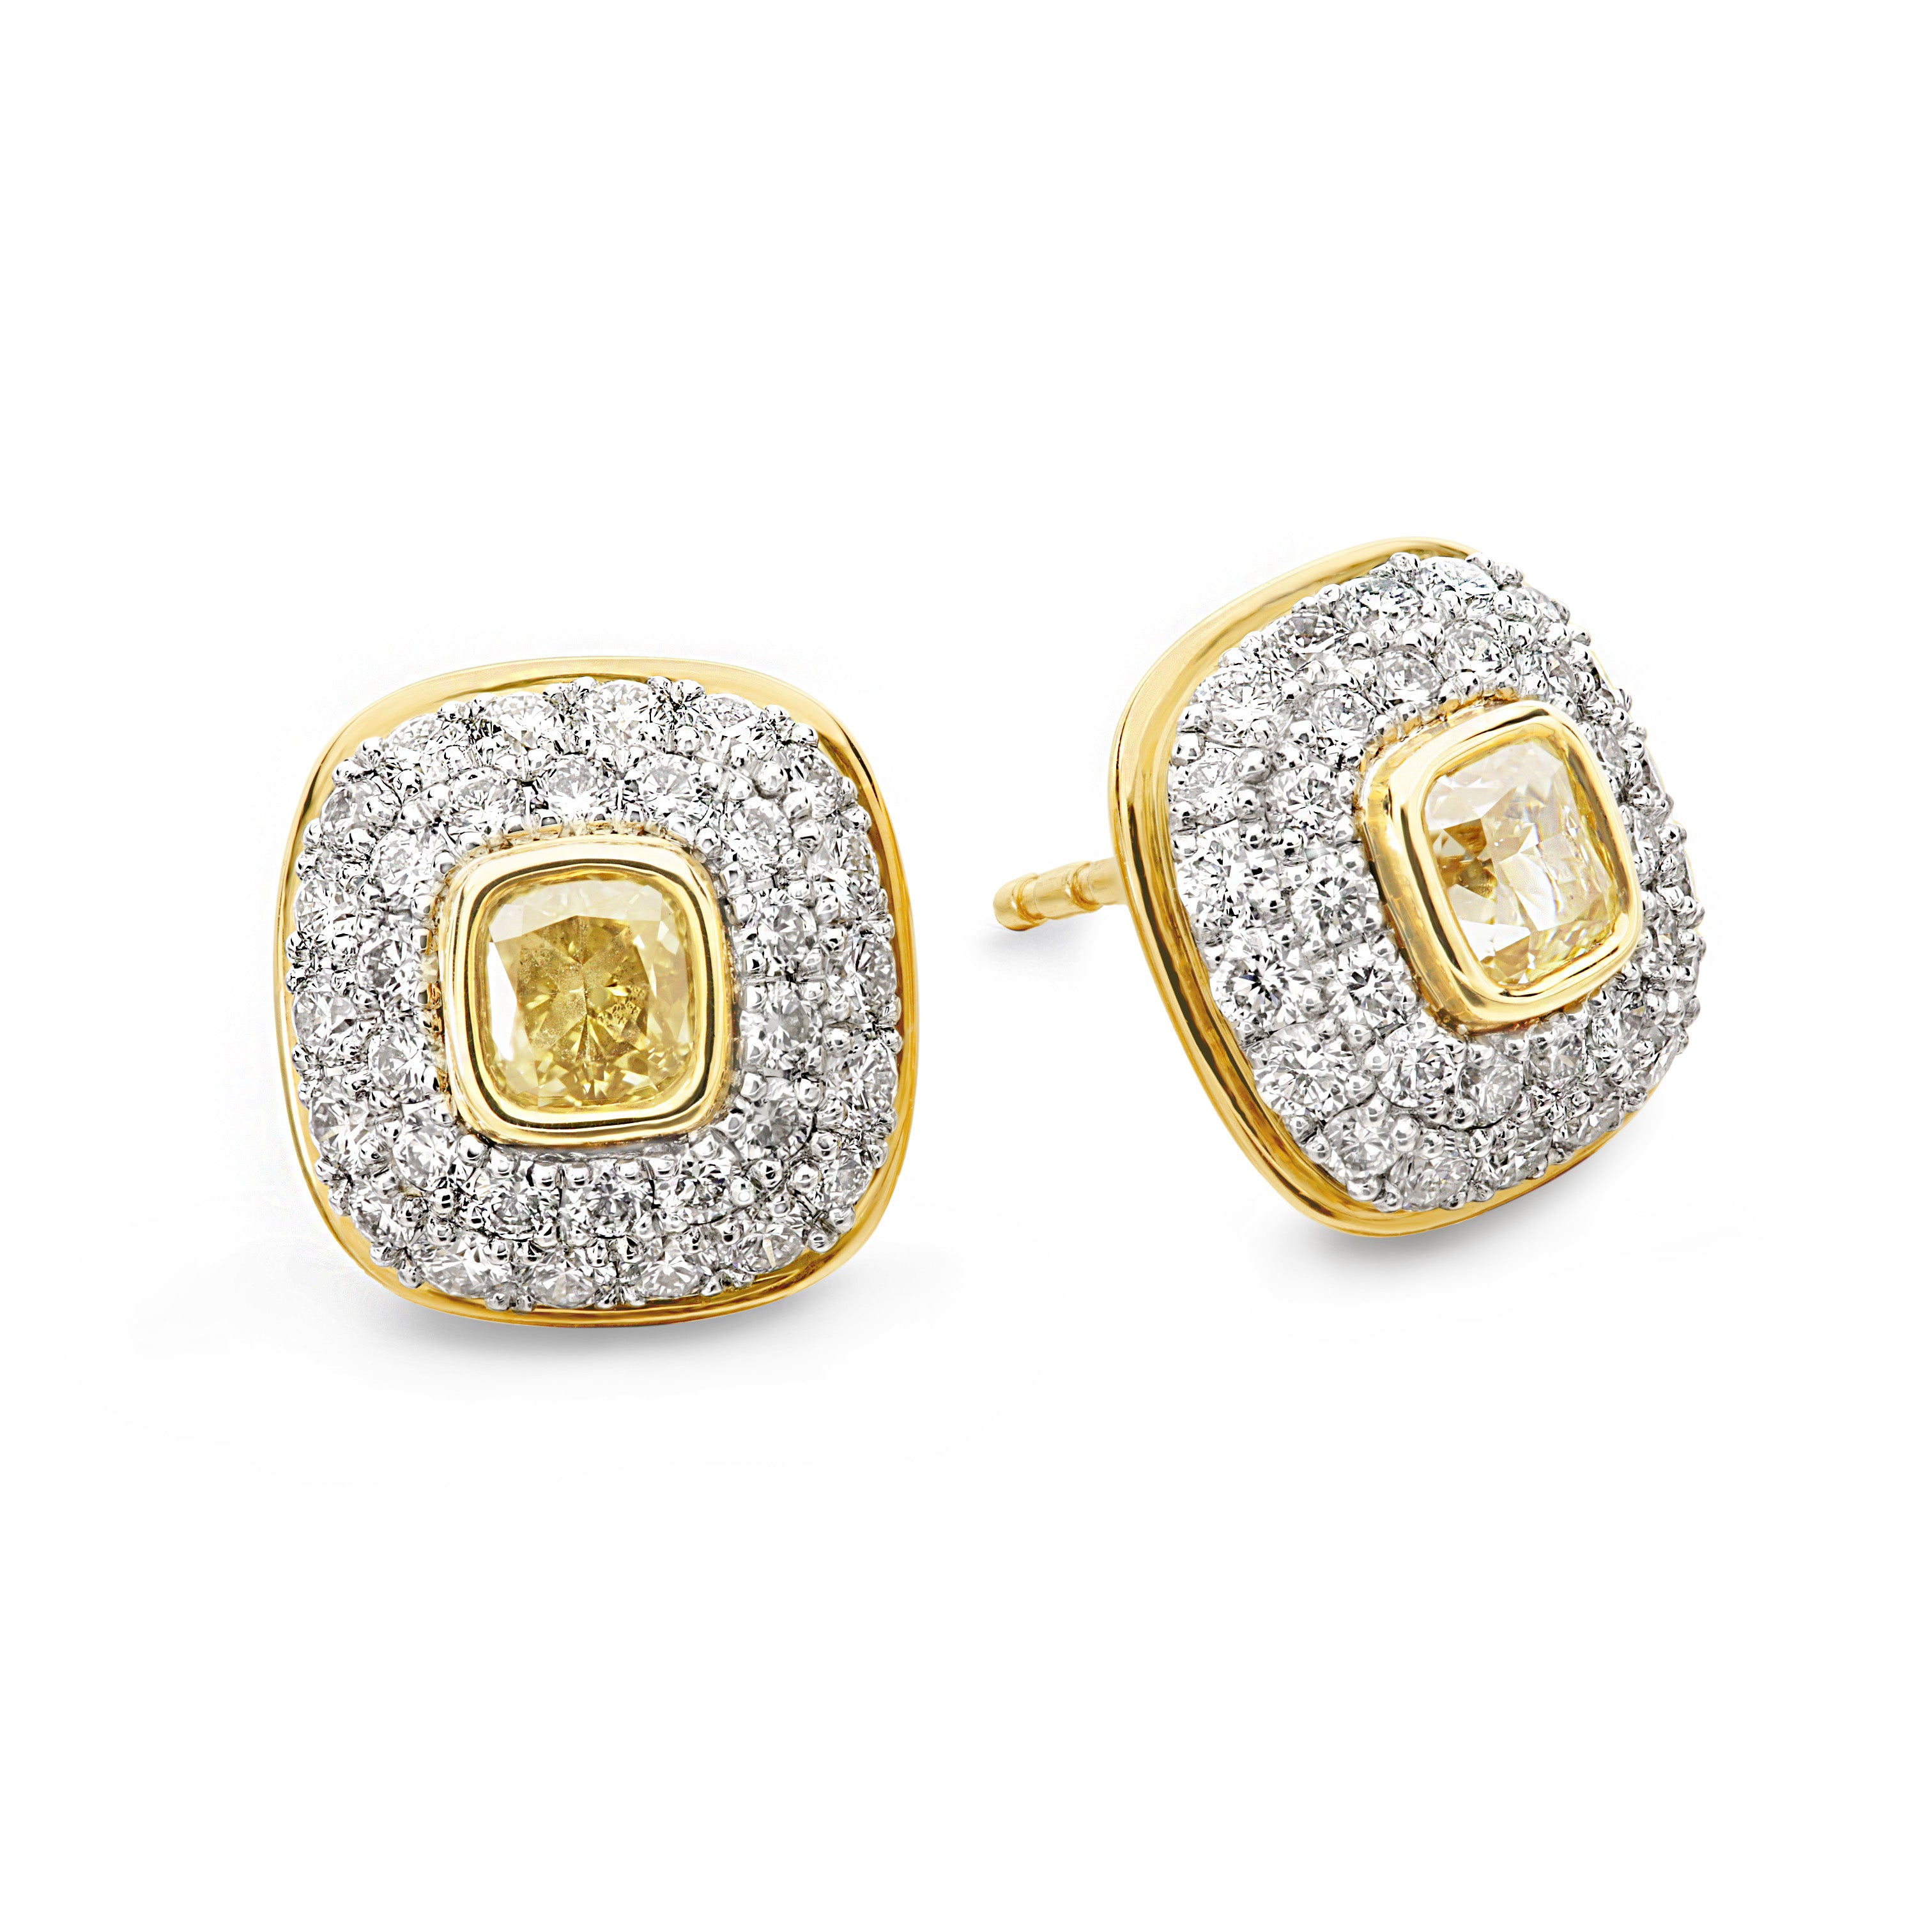 Shimansky - Yellow Diamond Halo Earrings 0.70ct crafted in 18K Yellow Gold and Platinum